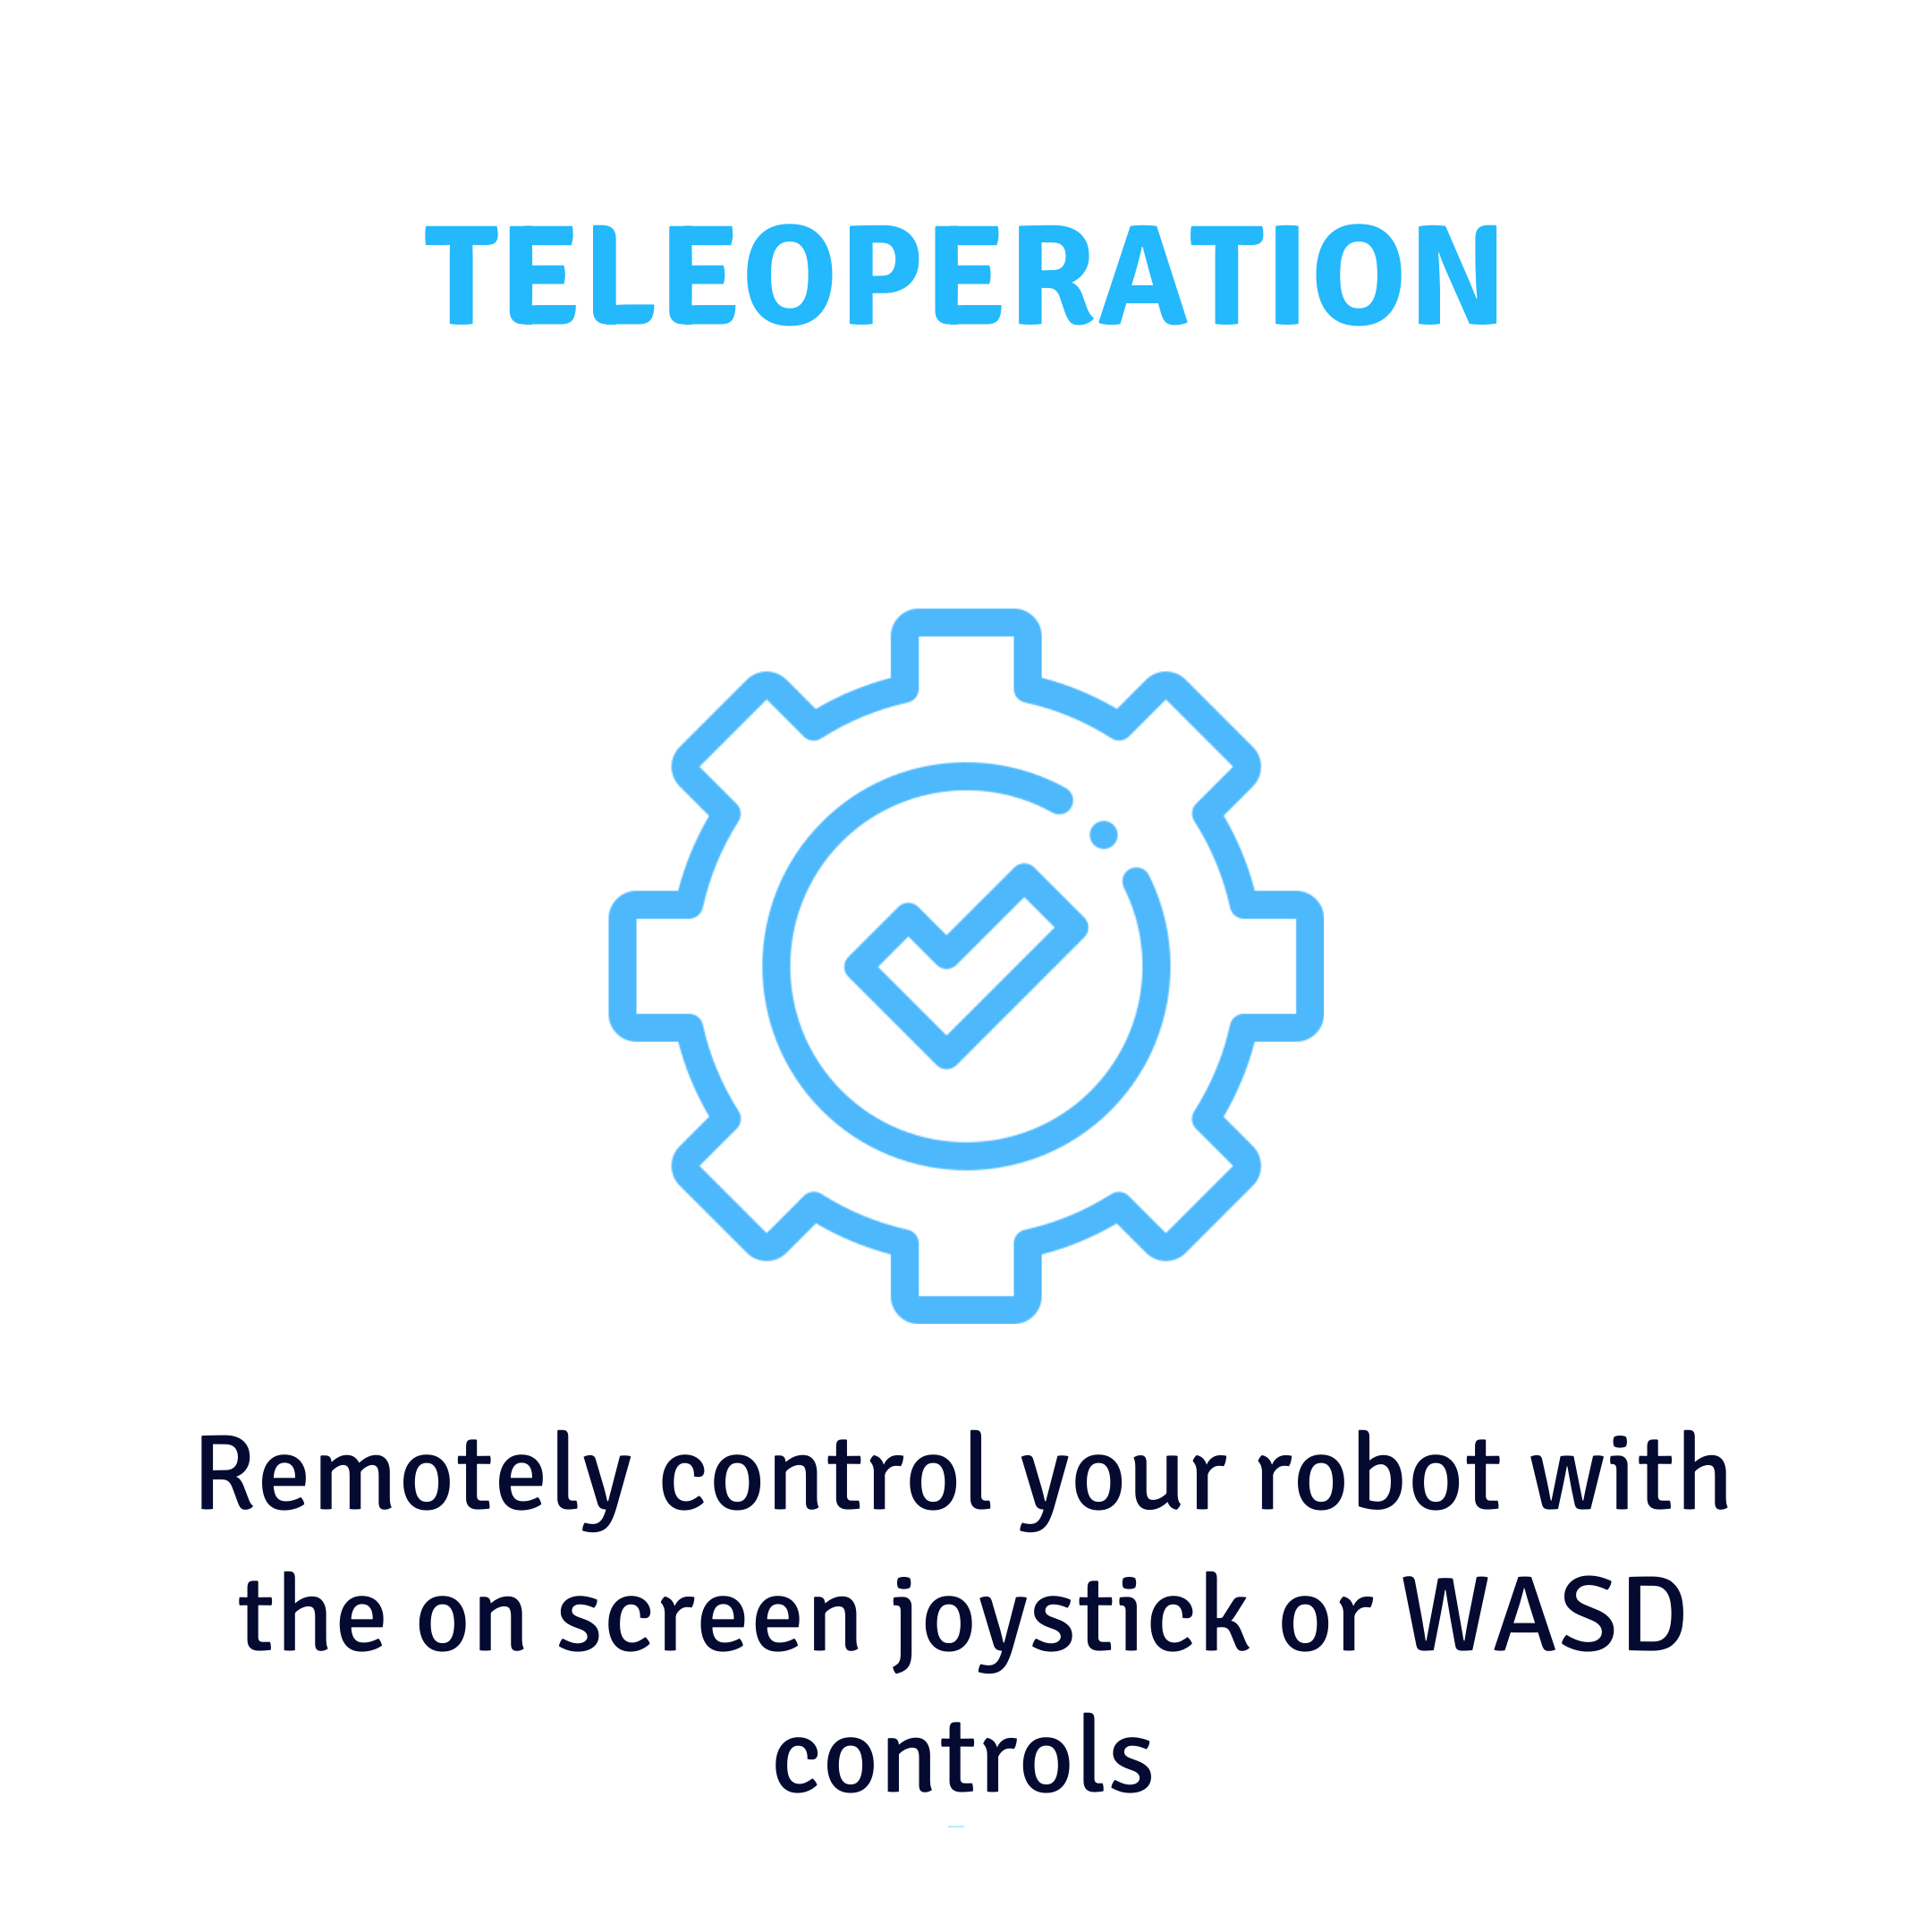 Seirios robot navigation system comes with smart features - teleoperation